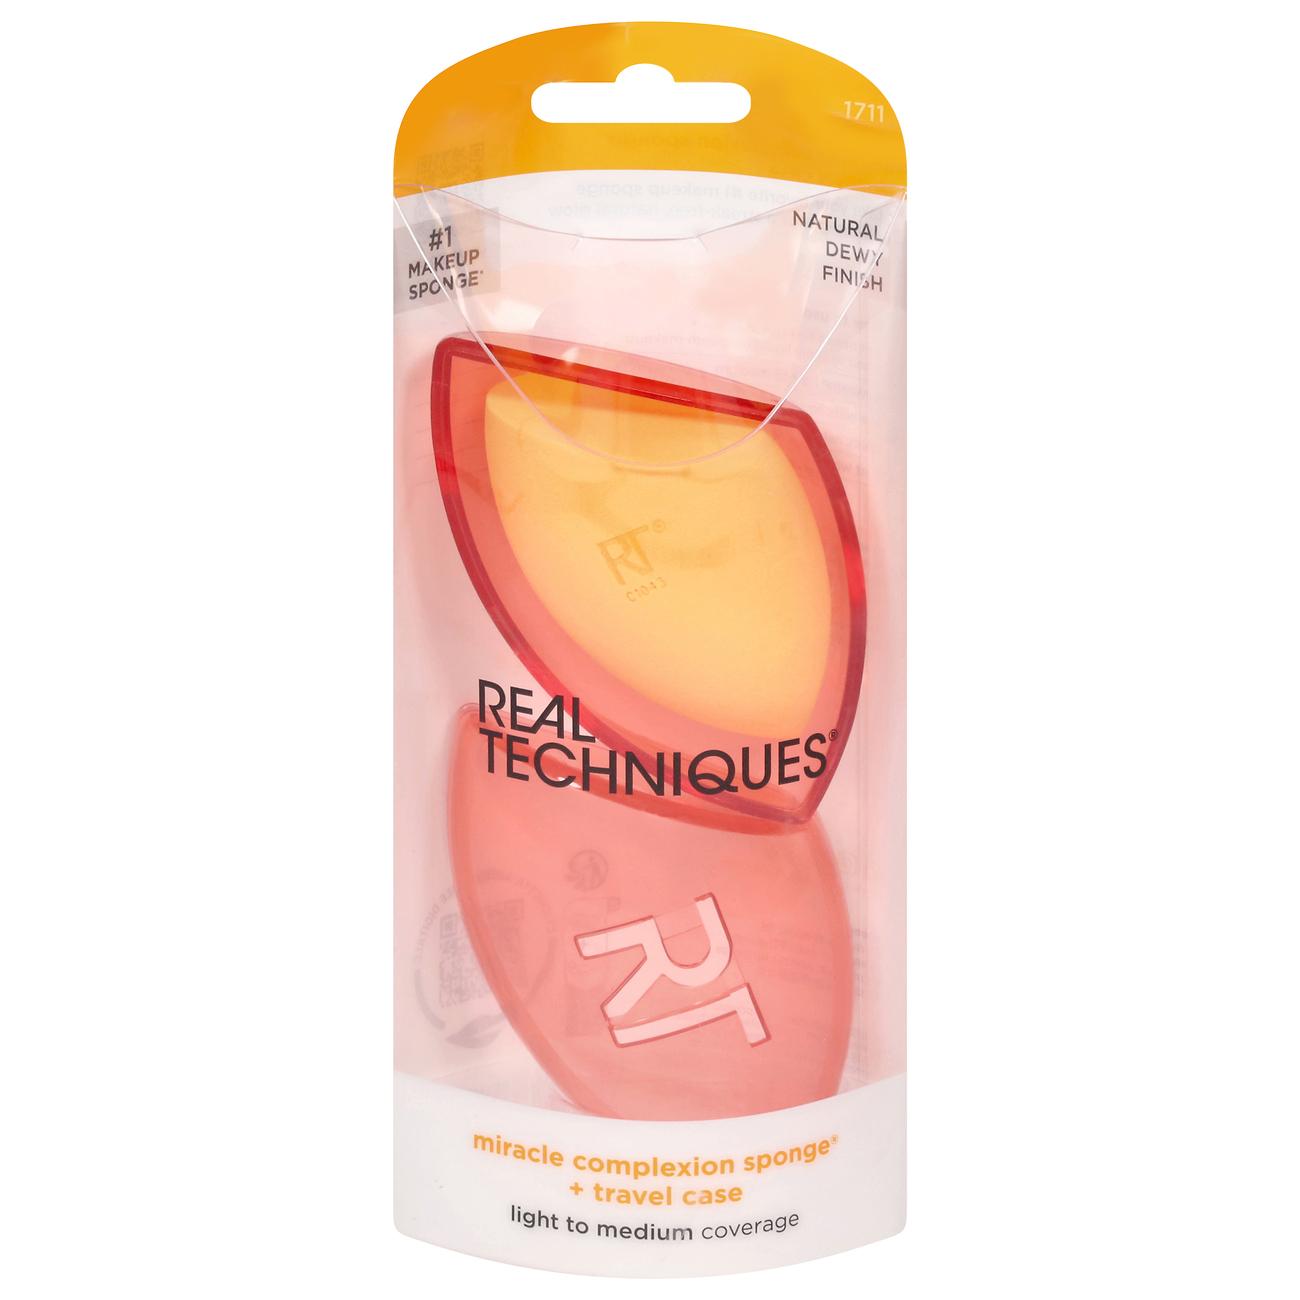 Real Techniques Miracle Complexion Sponge In Case; image 1 of 4